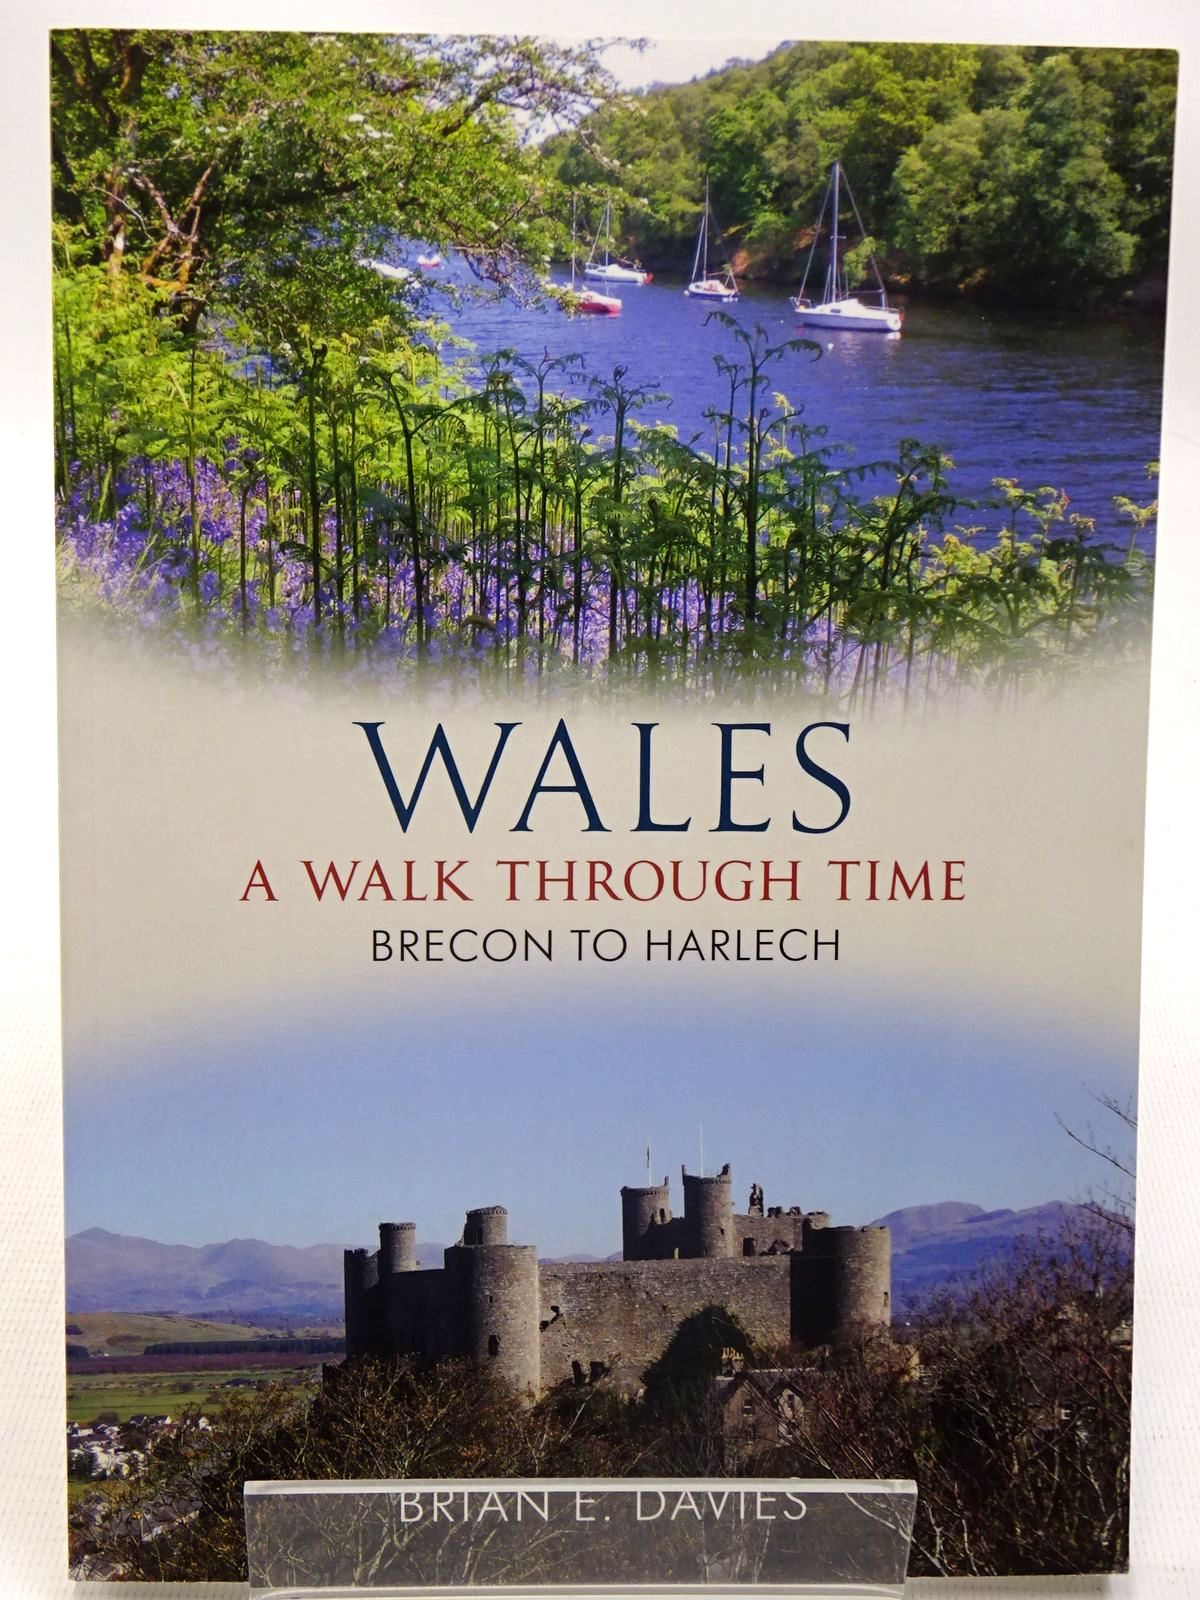 Photo of WALES A WALK THROUGH TIME: BRECON TO HARLECH written by Davies, Brian E. published by Amberley Publishing (STOCK CODE: 2126505)  for sale by Stella & Rose's Books